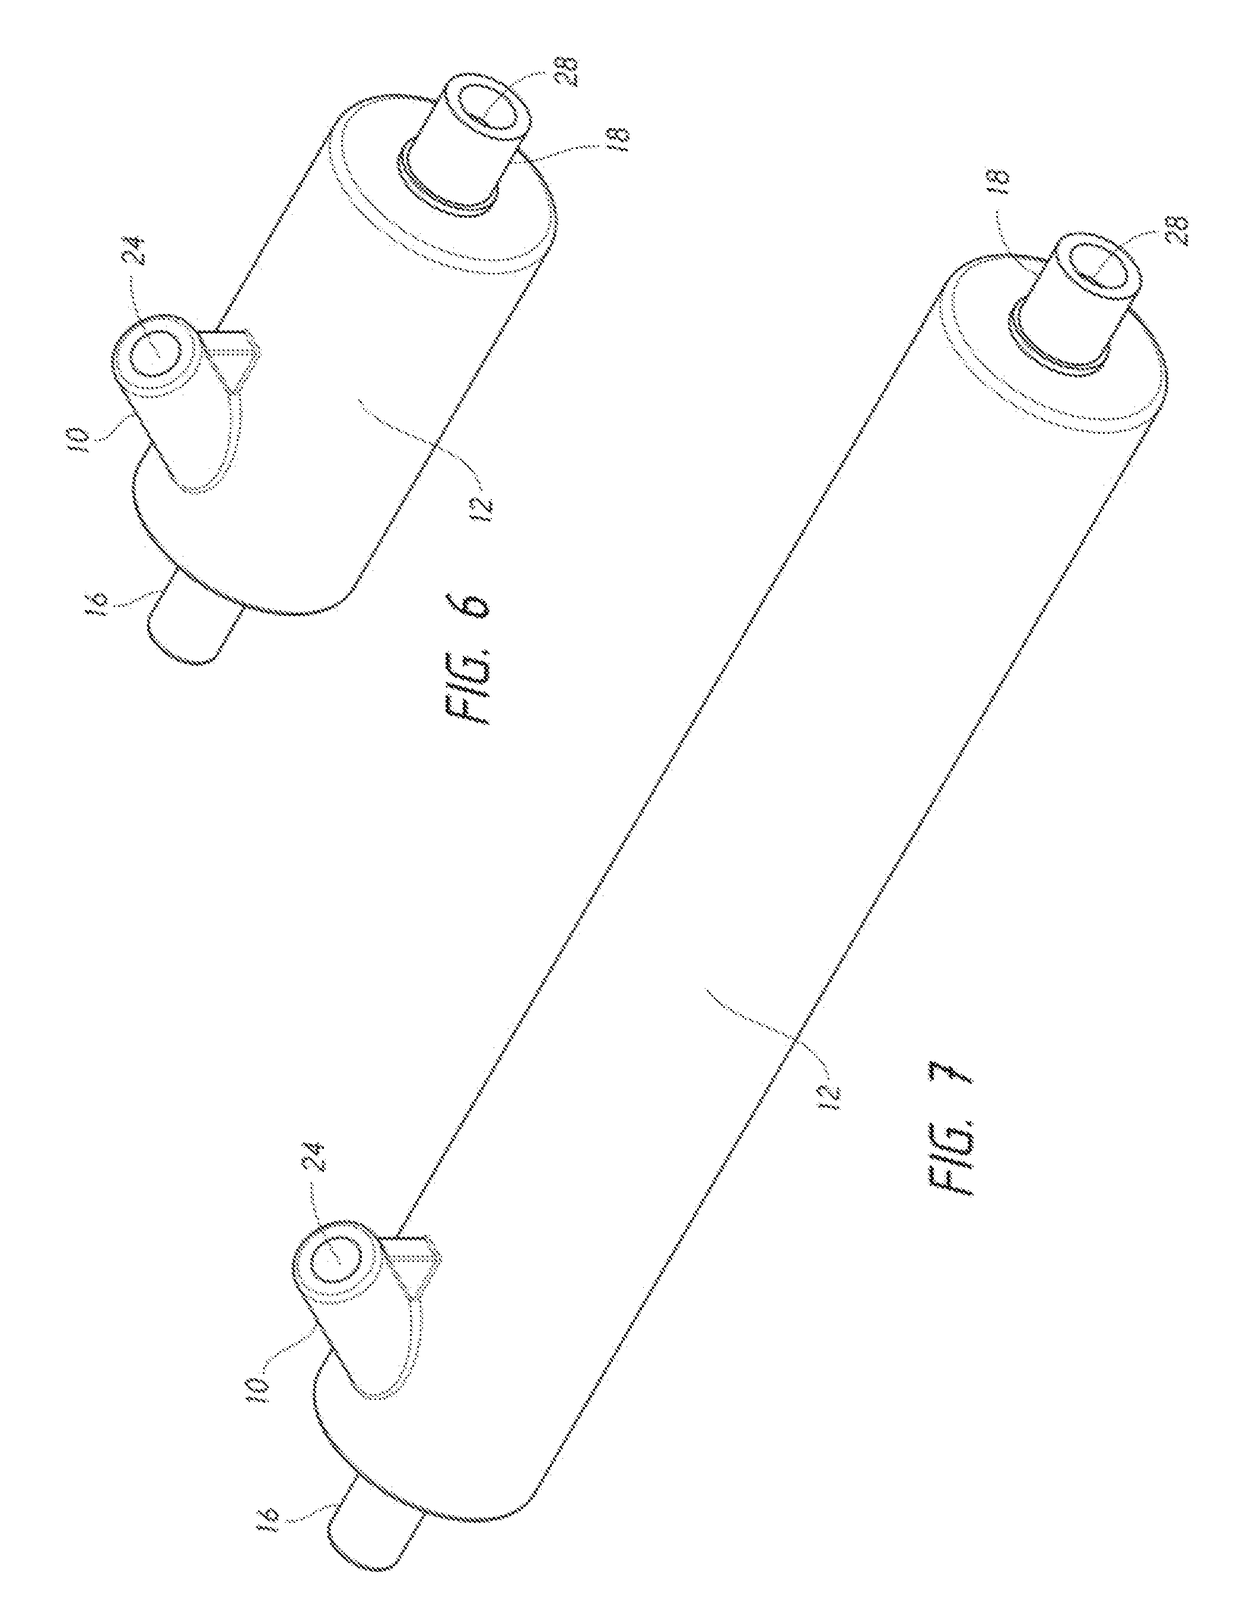 Gas Removal Apparatus and Related Methods